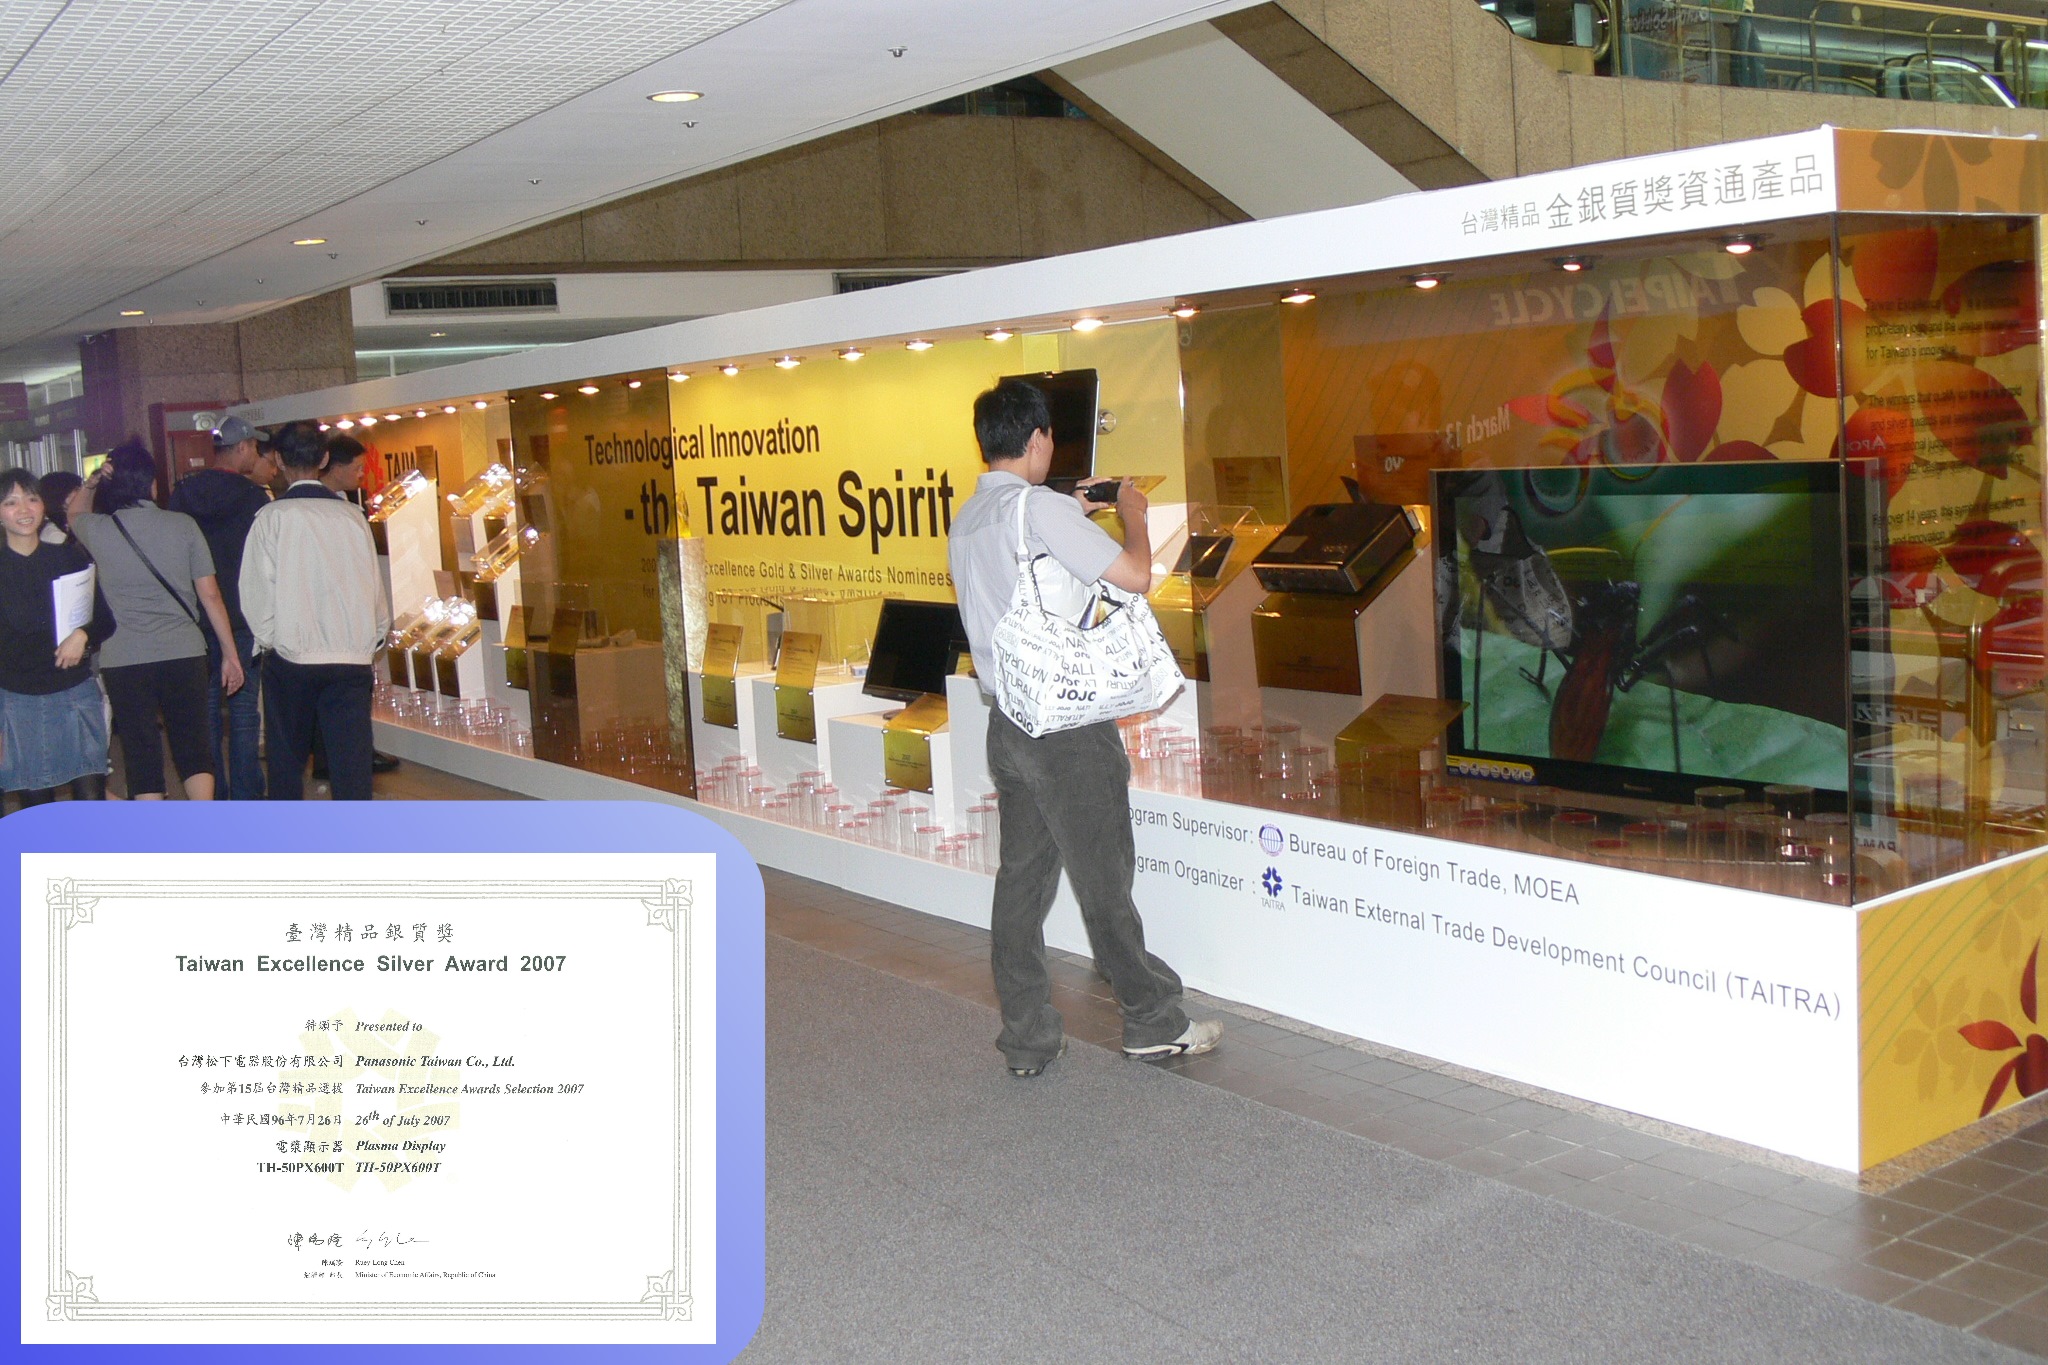 Photo of Plasma monitor won the Taiwan Excellence Silver Award 2007 and display in World Trade Center